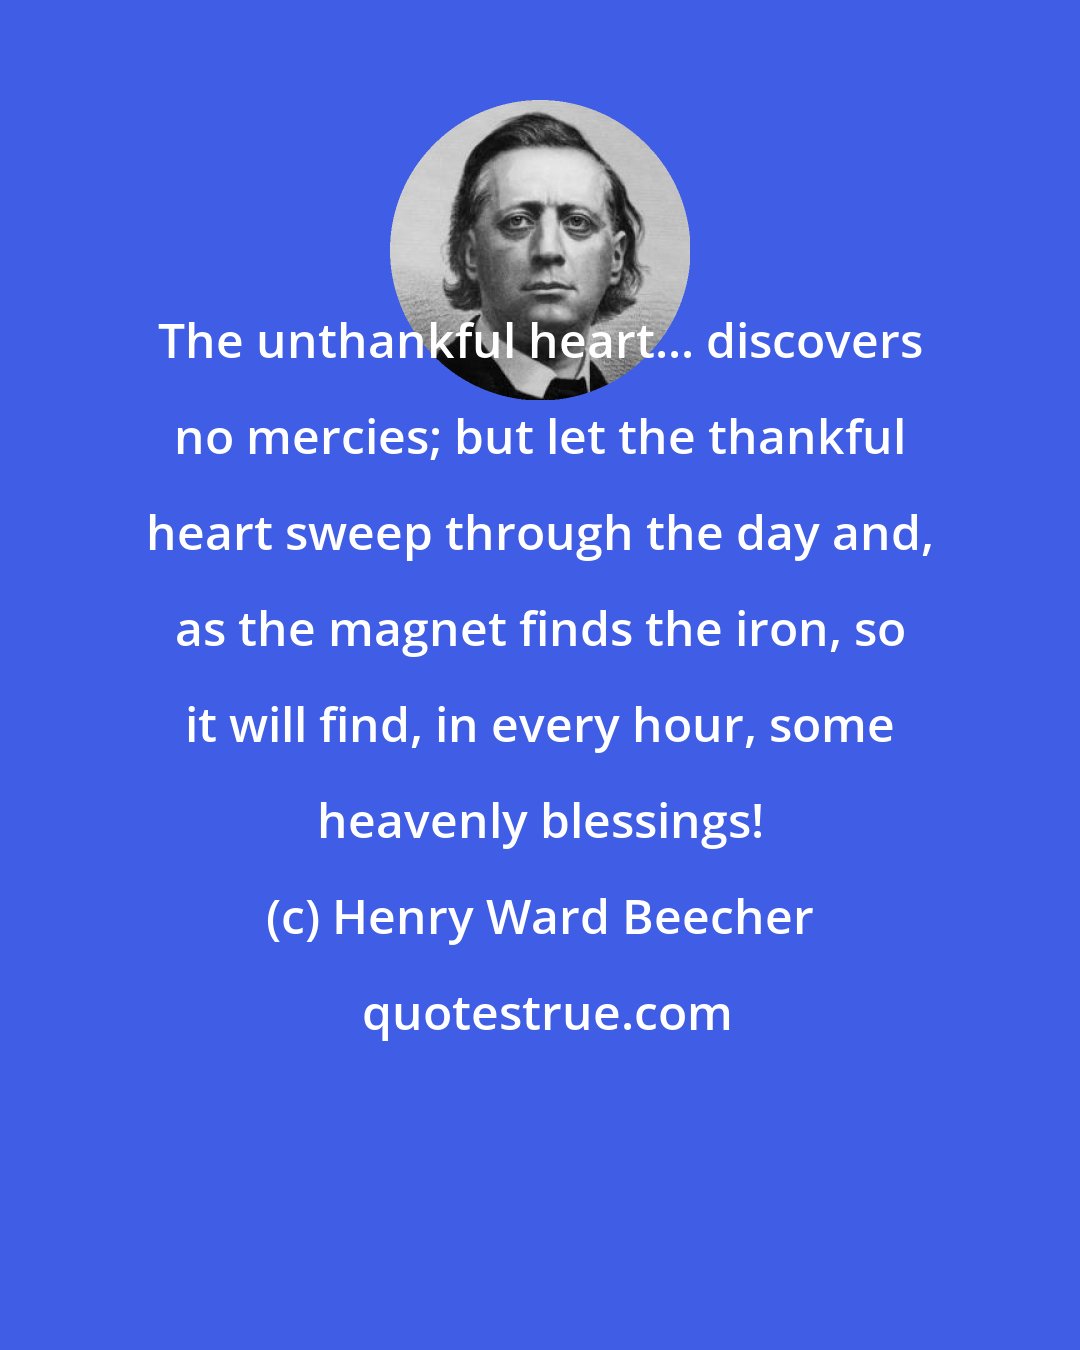 Henry Ward Beecher: The unthankful heart... discovers no mercies; but let the thankful heart sweep through the day and, as the magnet finds the iron, so it will find, in every hour, some heavenly blessings!